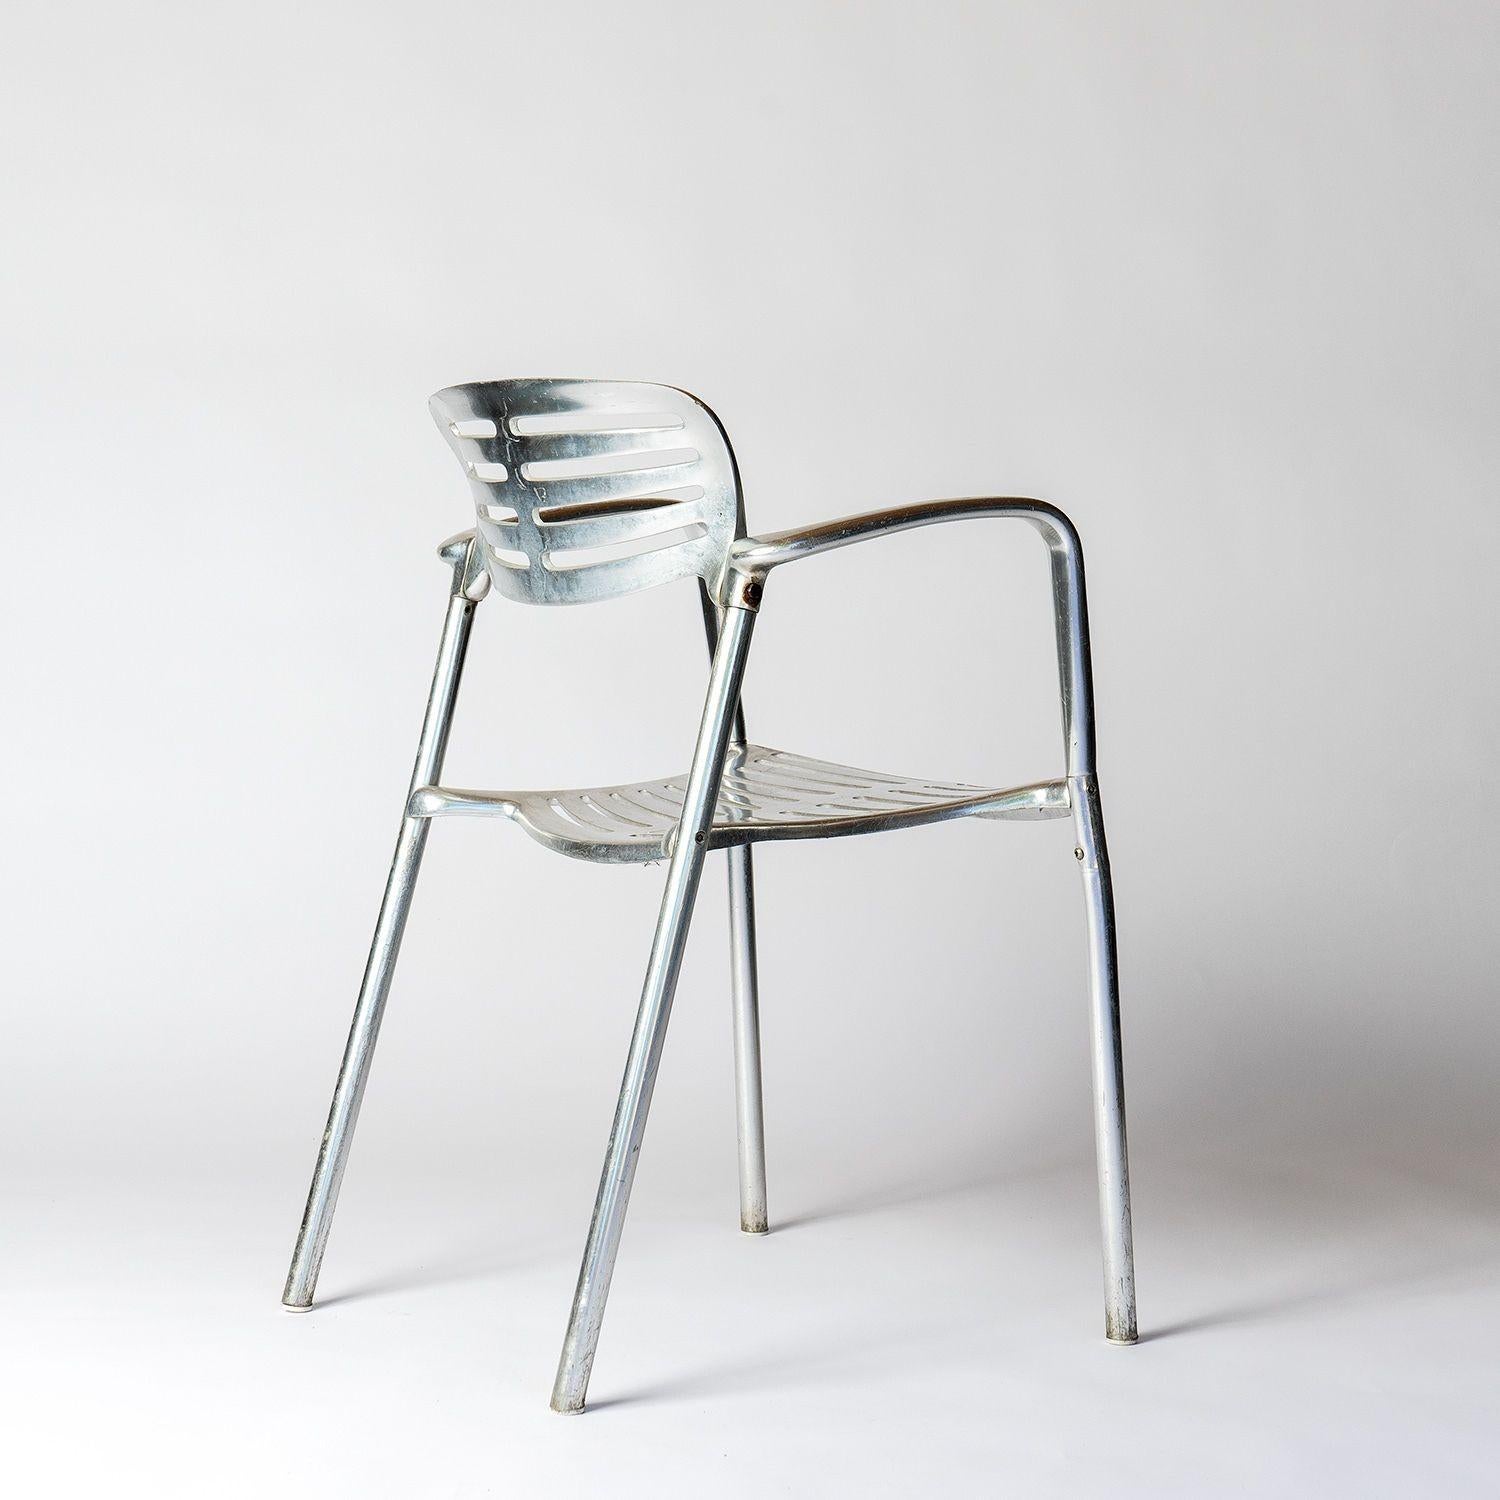 Anodized 'Toledo' Indoor/Outdoor Chair by Jorge Pensi for Amat, 1980s